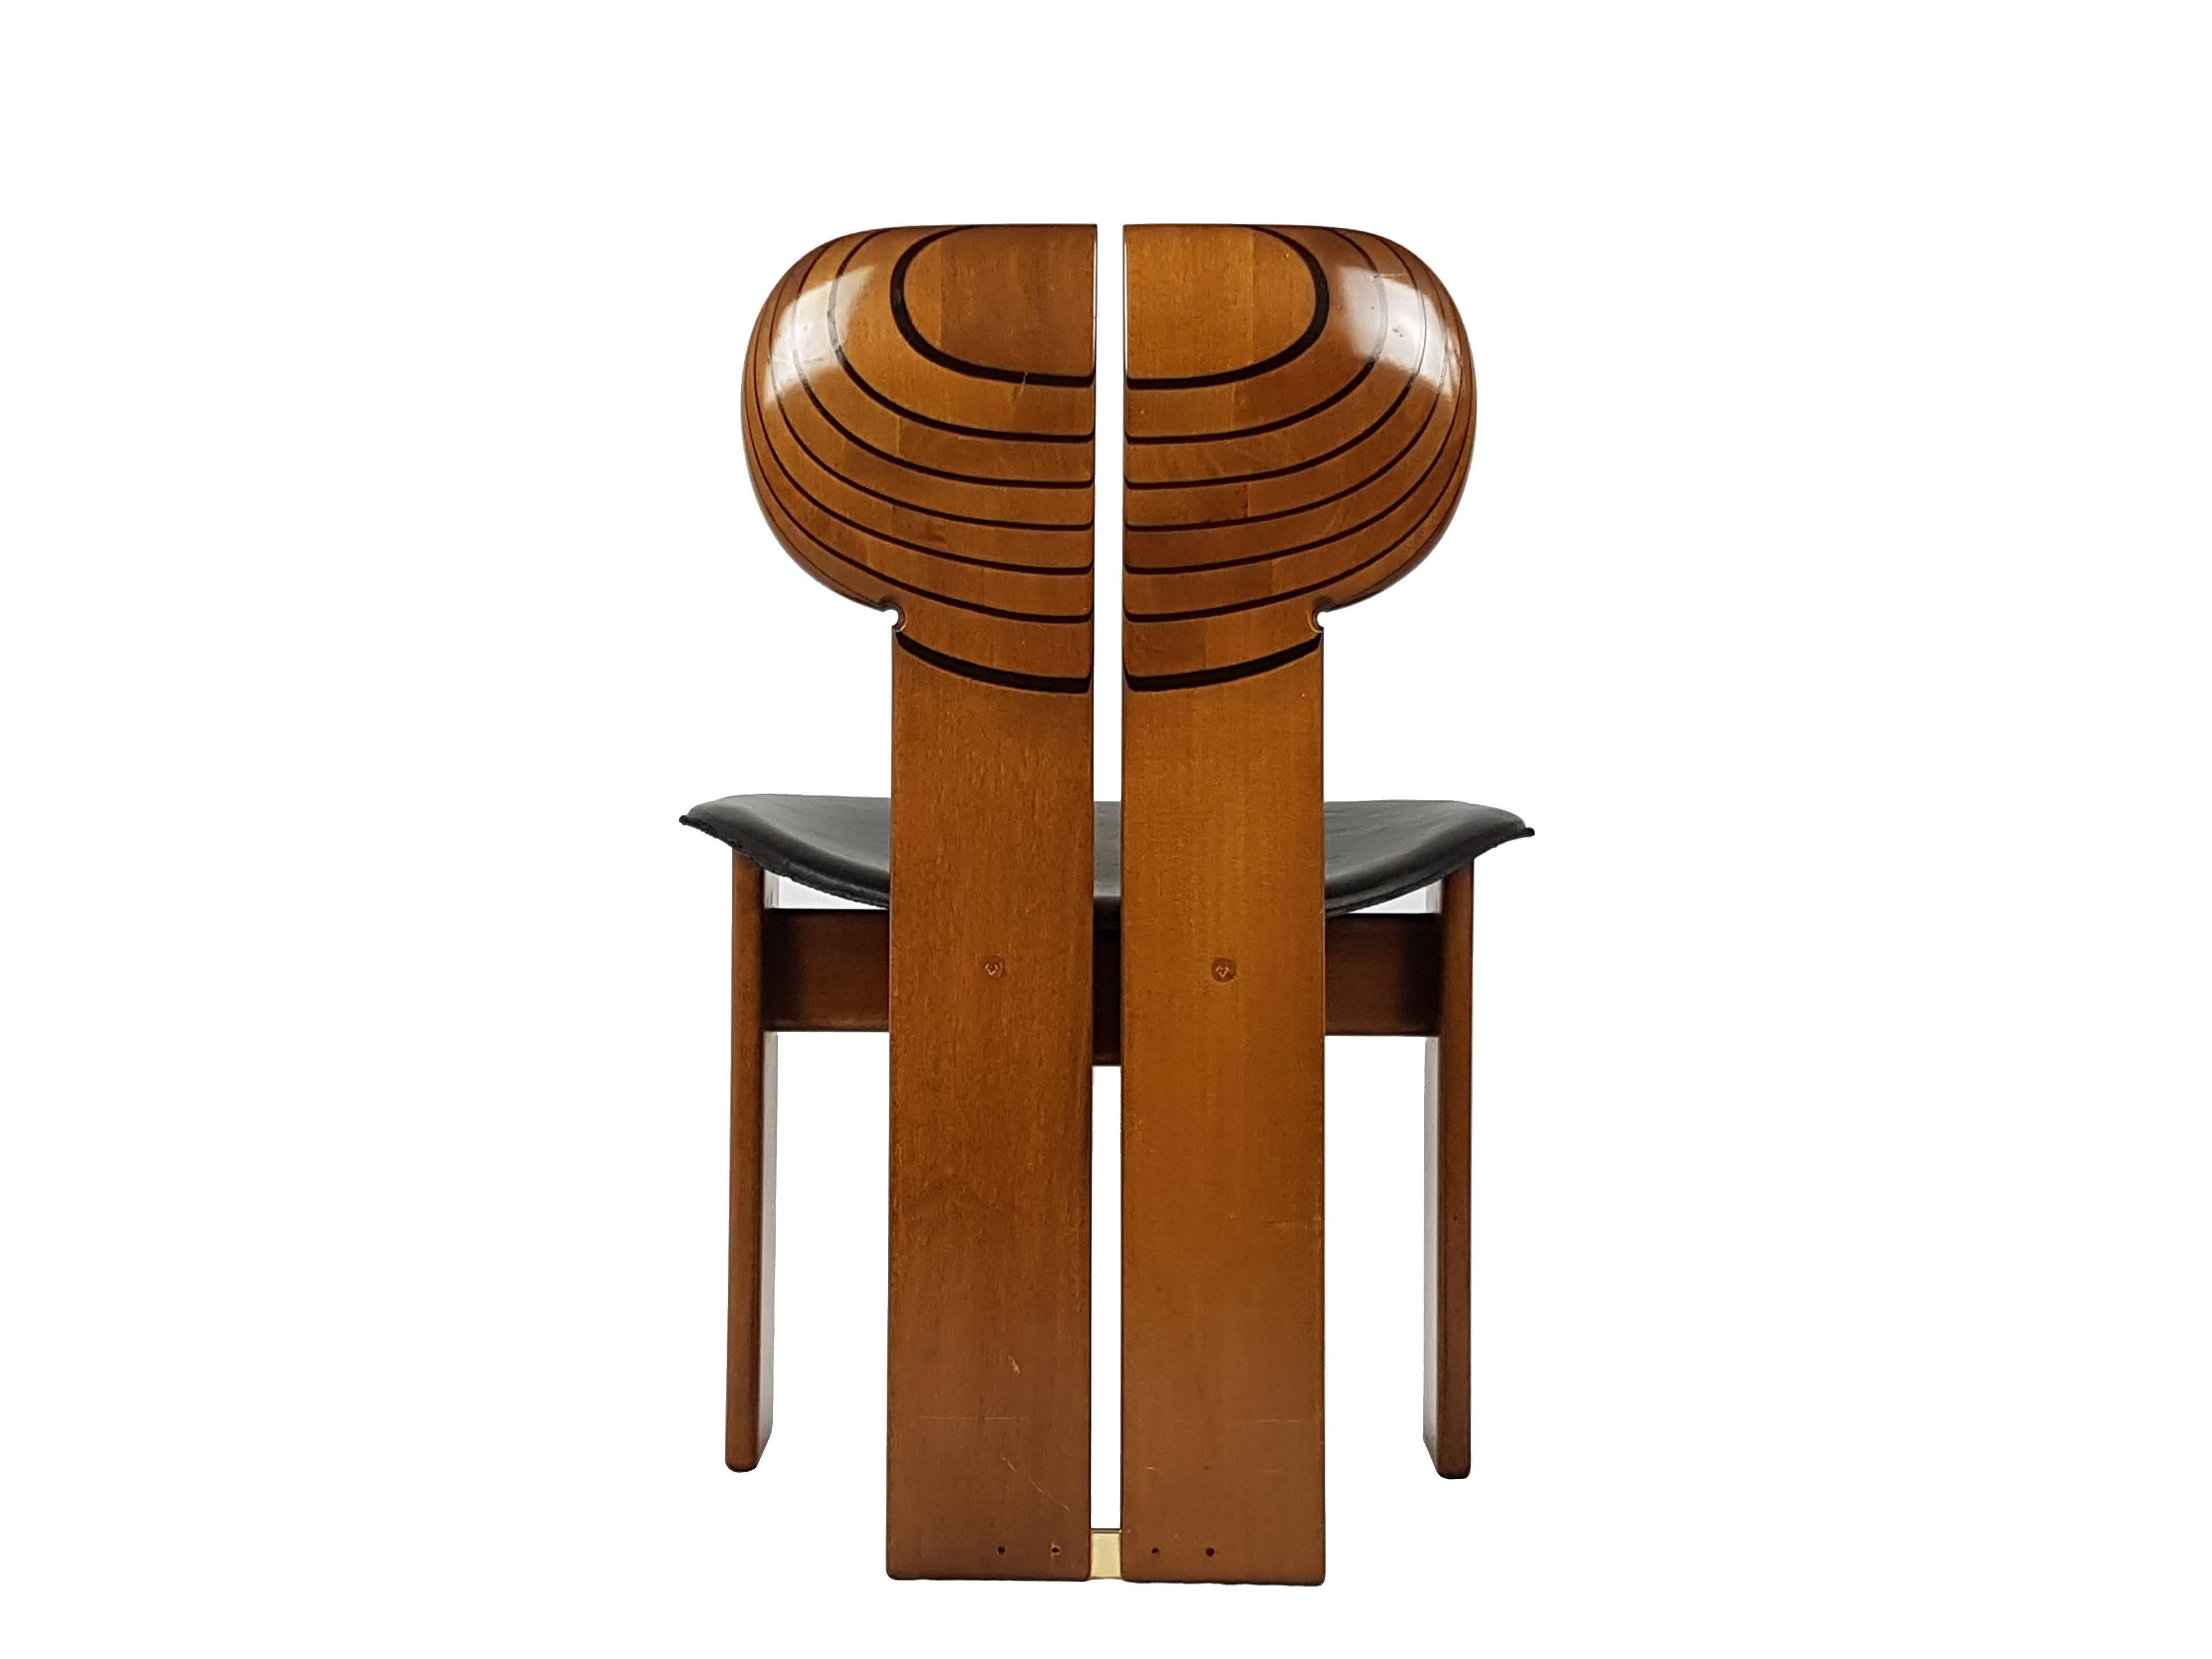 This set of four Africa chairs was designed by Afra and Tobia Scarpa for the Maxalto 